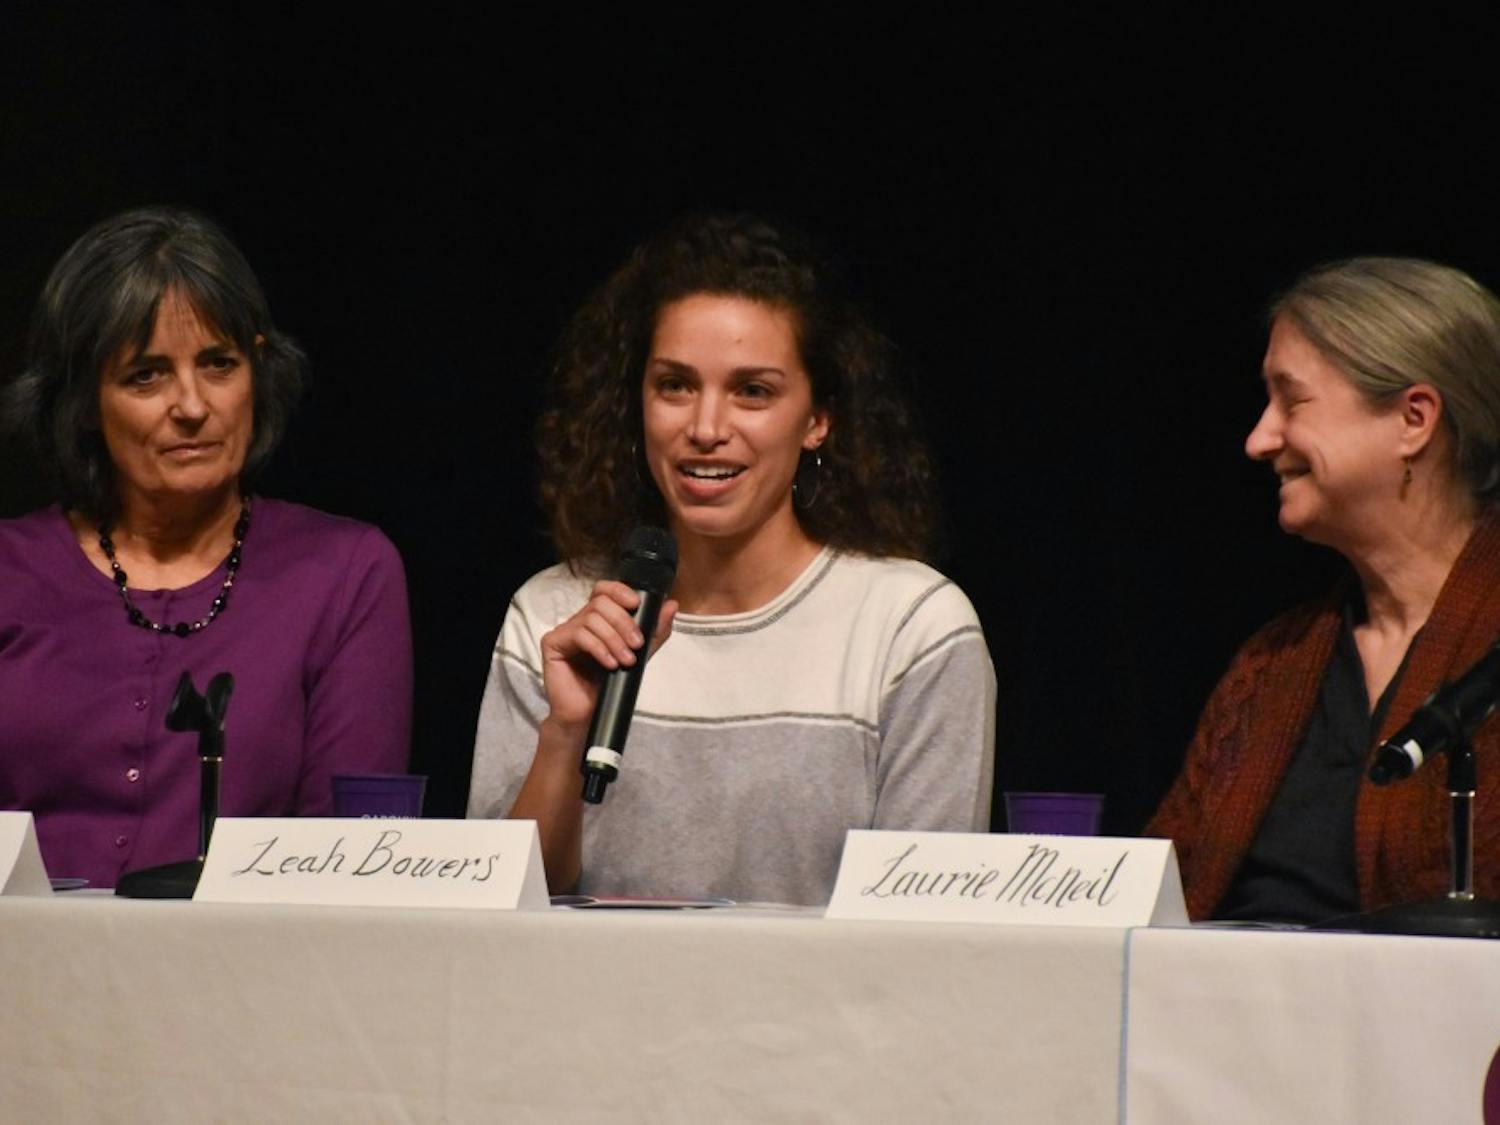 Leah Bowers (center), alongside Susan Girdler (left) and Laurie McNeil (right), speaks at the Gender & Stem seminar on Wednesday, Nov. 28,2018 at the Stone Center.